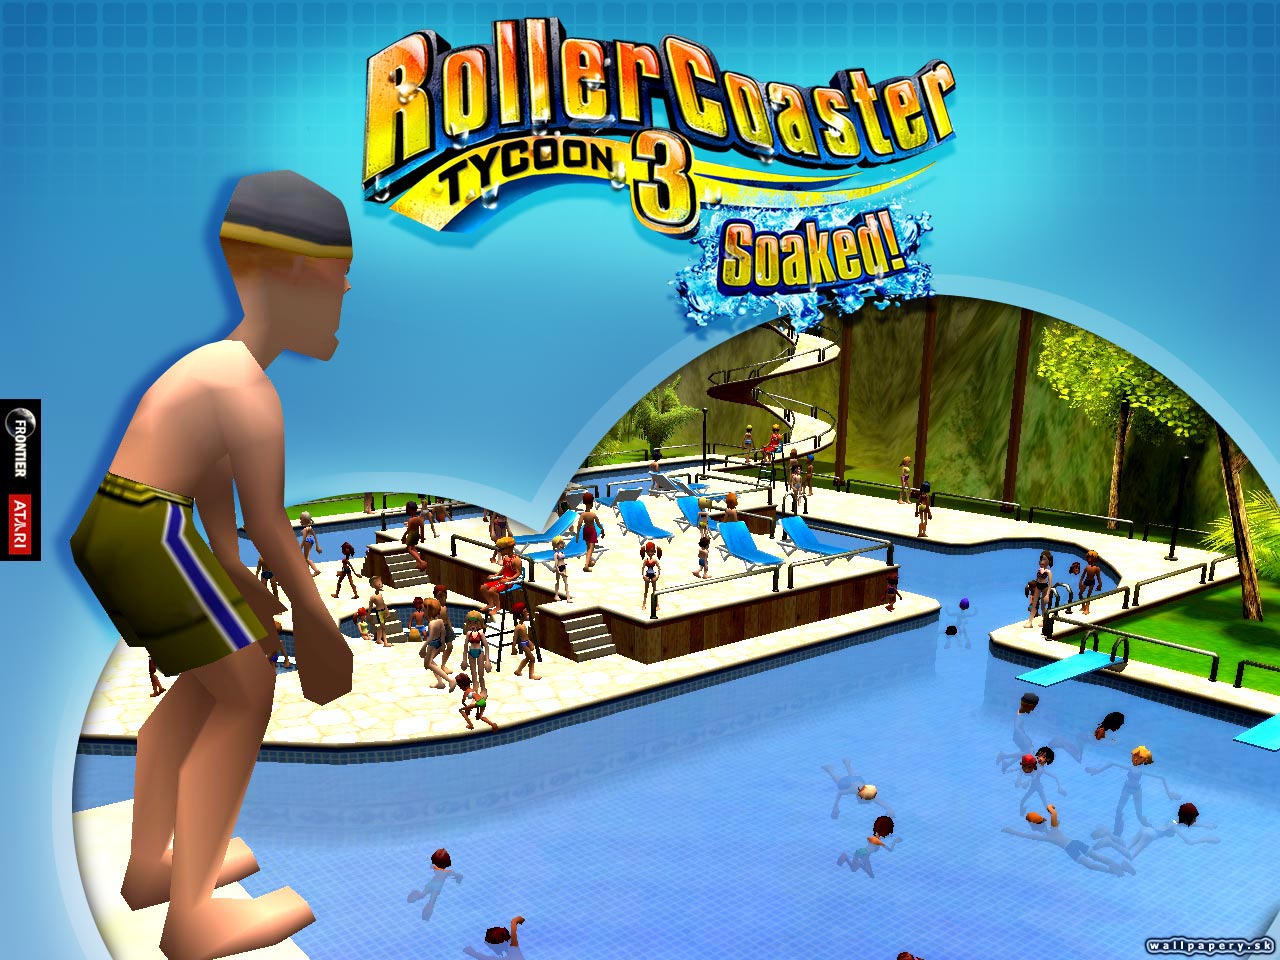 RollerCoaster Tycoon 3: Soaked! - wallpaper 2